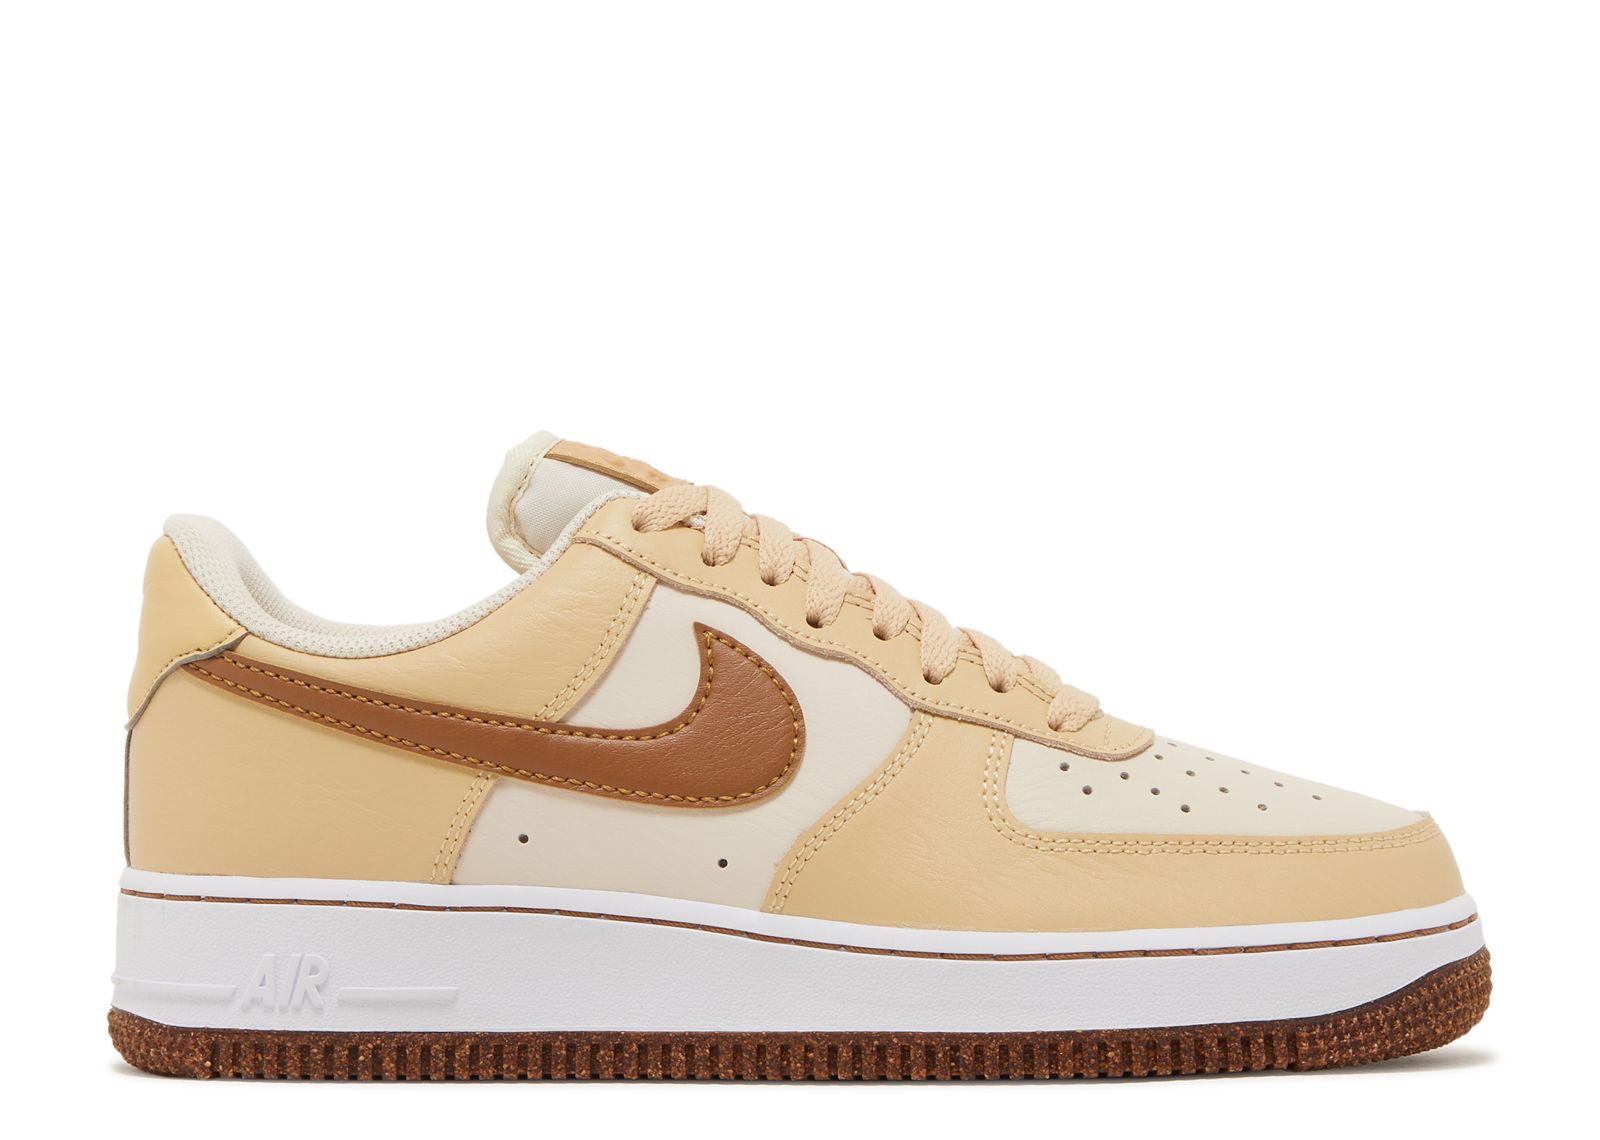 Air Force 1 '07 LV8 EMB 'Inspected By Swoosh' - Nike - DQ7660 200